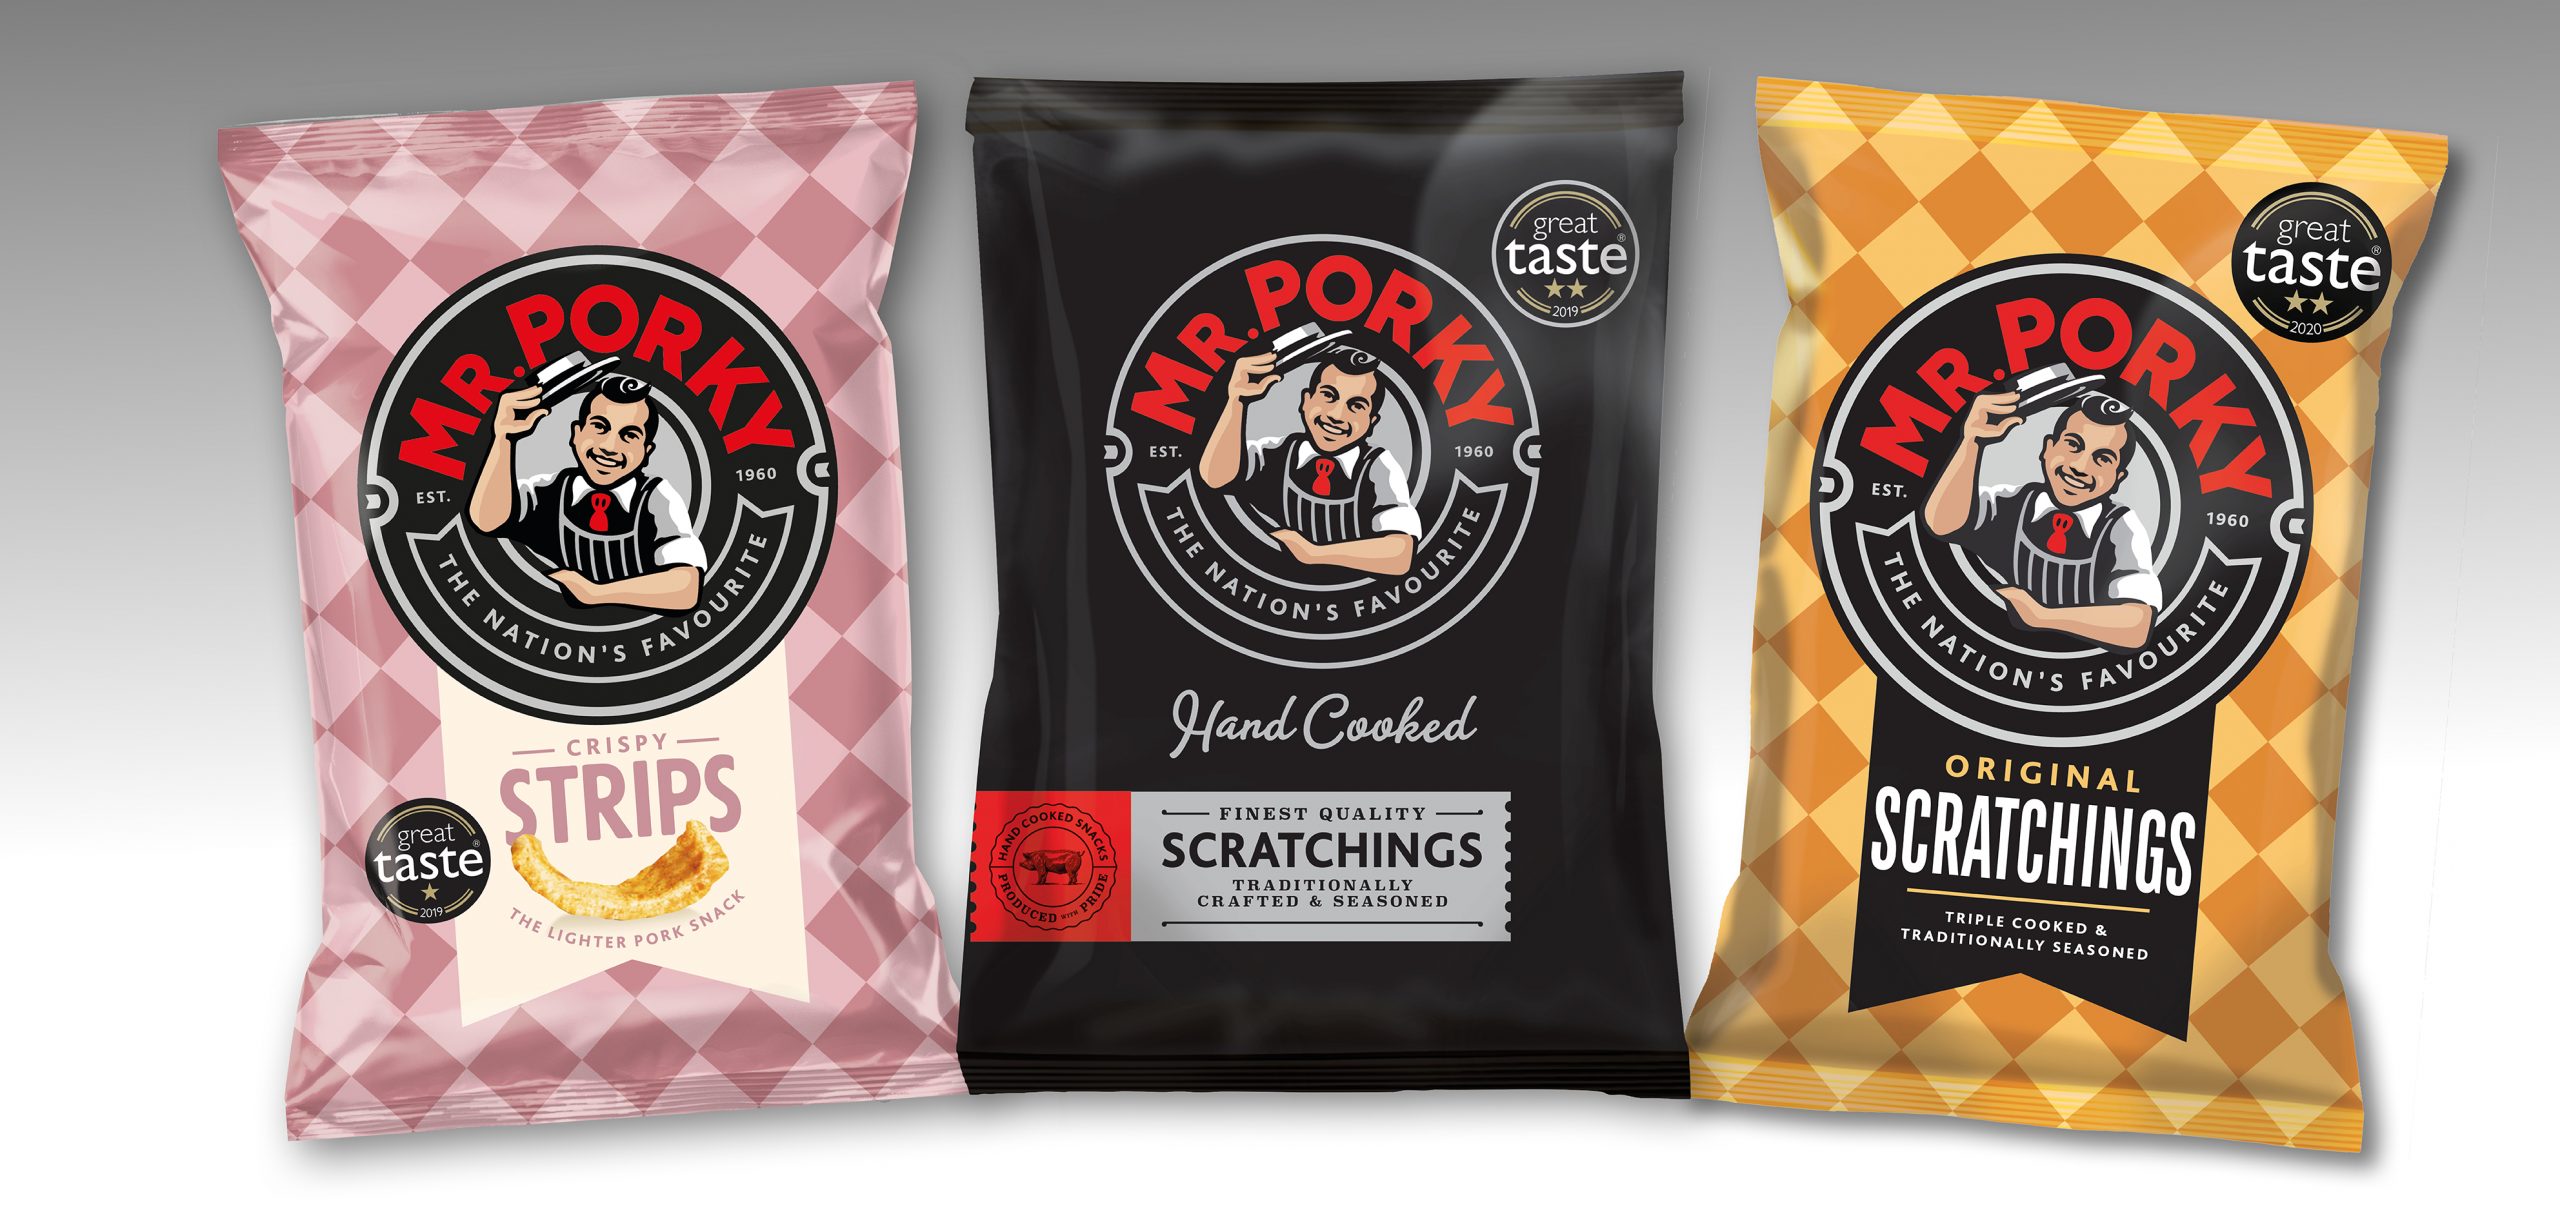 Tayto launches biggest ever Mr Porky ad campaign